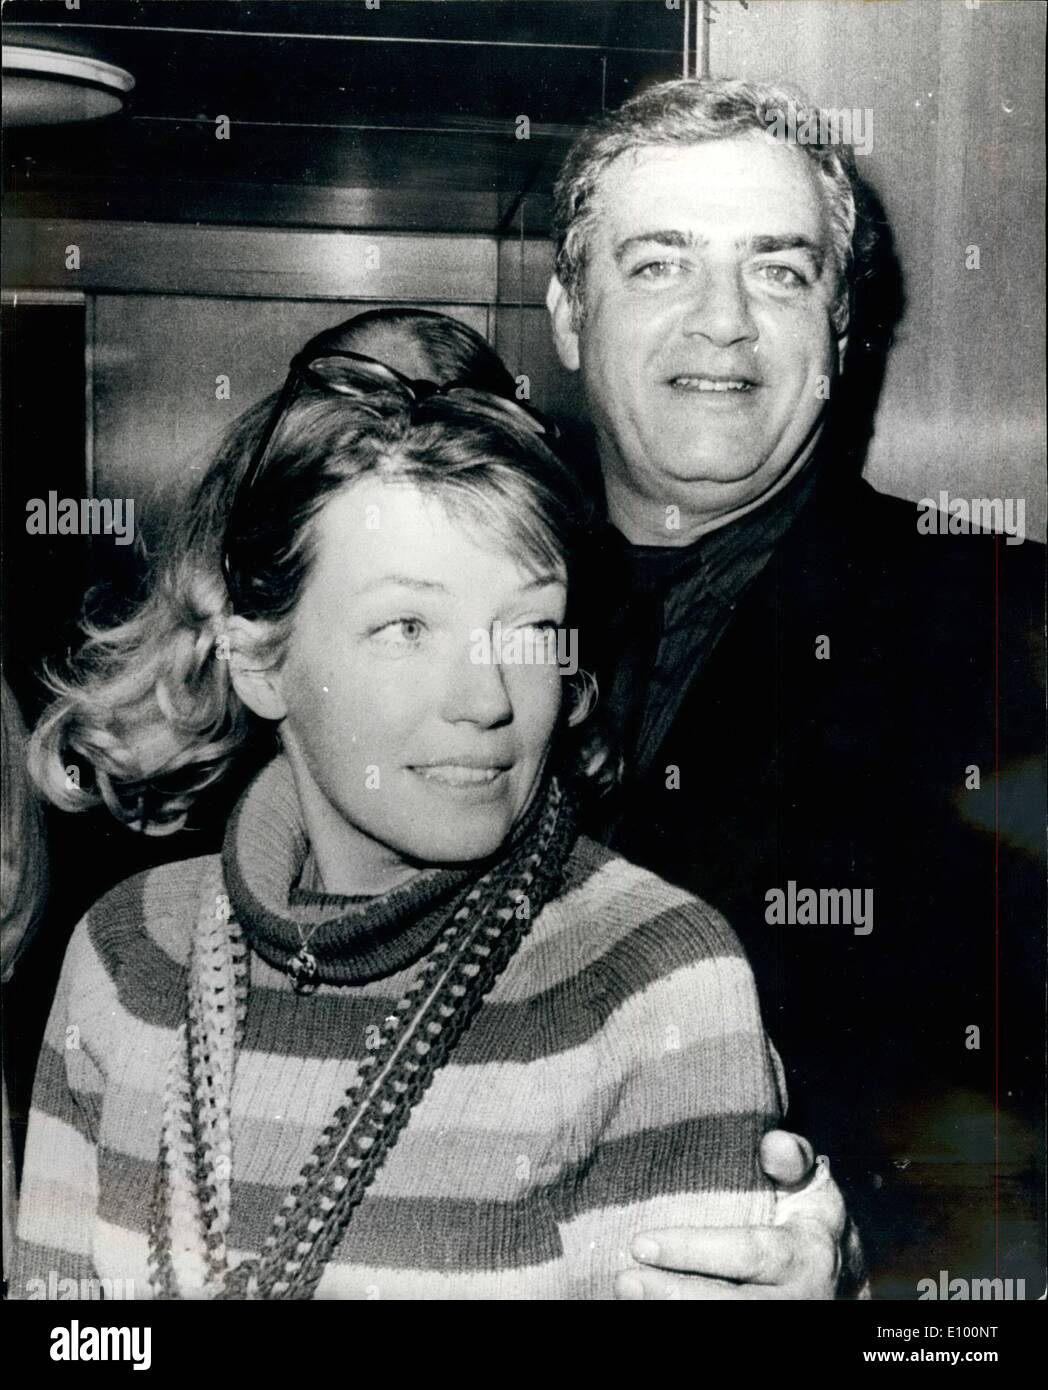 Feb. 02, 1972 - ''Chief Ironside'' In War Play: Raymond Burr, famous as lawyer Perry Mason, and the wheel-chair bound detective, Chief Ironside, in the television series - is pictured here in Copenhagen with Lene Bro, Denmark's youngest woman M.P. Raymond Burr is in Copenhagen making arrangement for a new film in which he will play the part of an American pilot shot down in Denmark during World War II. Stock Photo